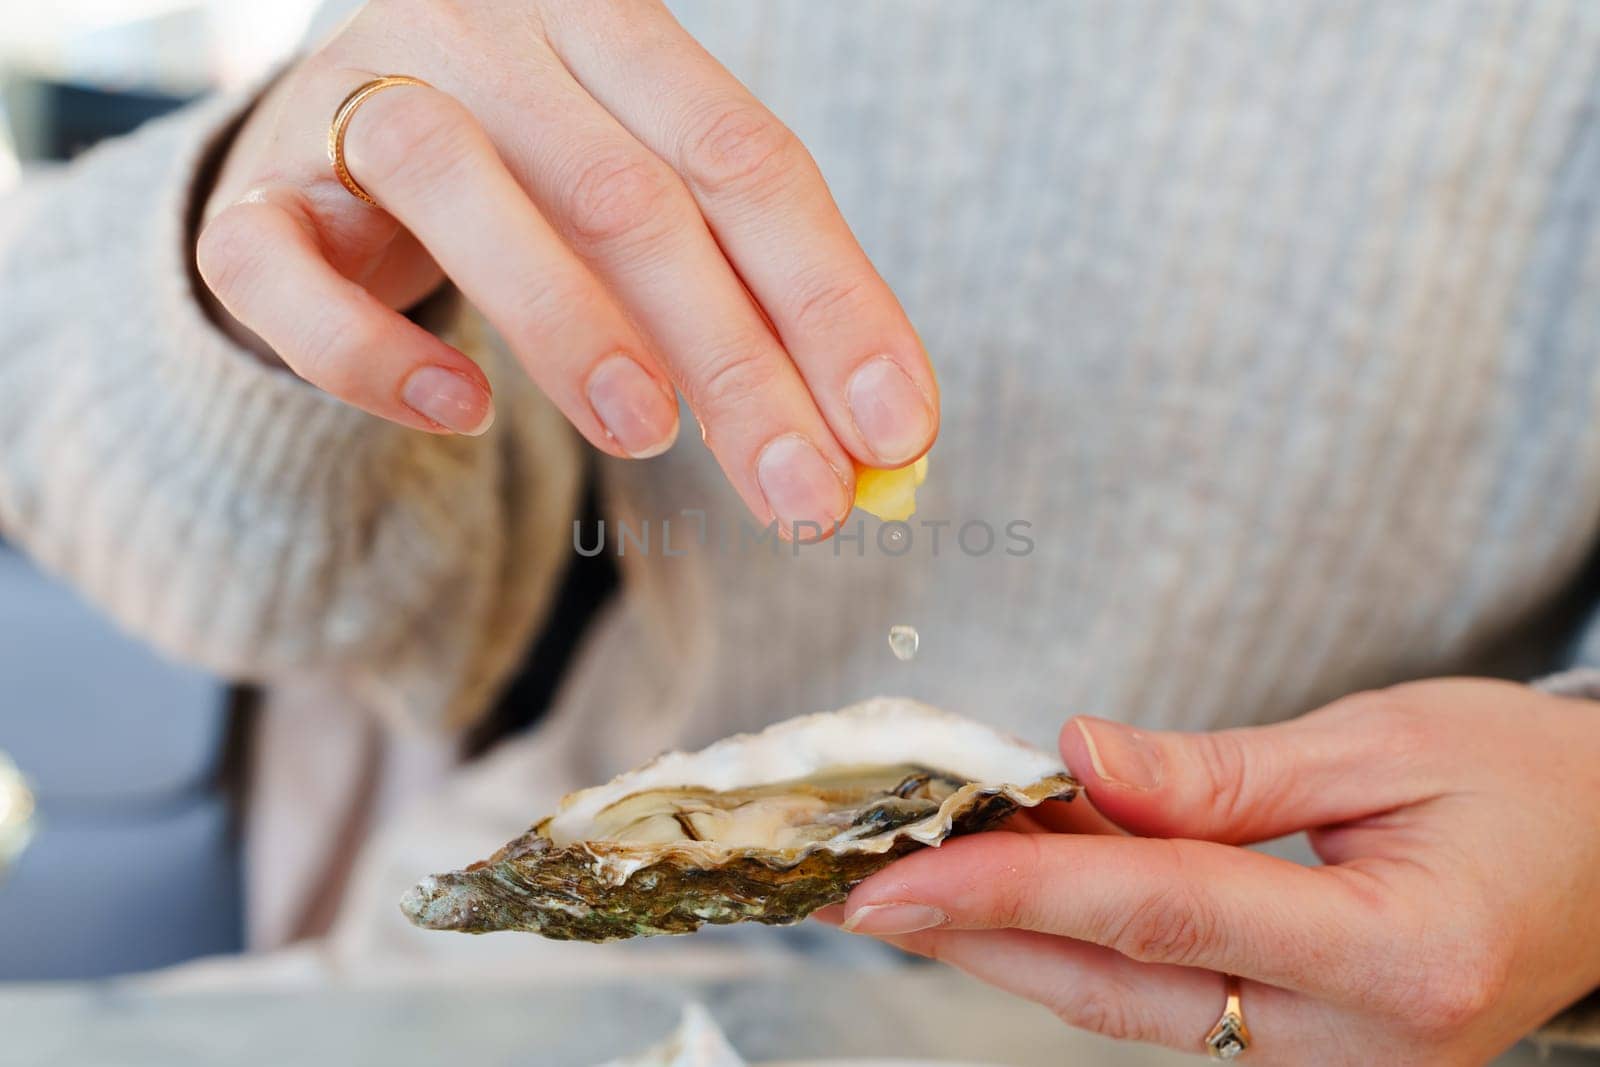 Eating oysters and lemons at an outdoor luxury picnic - a girl enjoying a gastronomic treat by PhotoTime